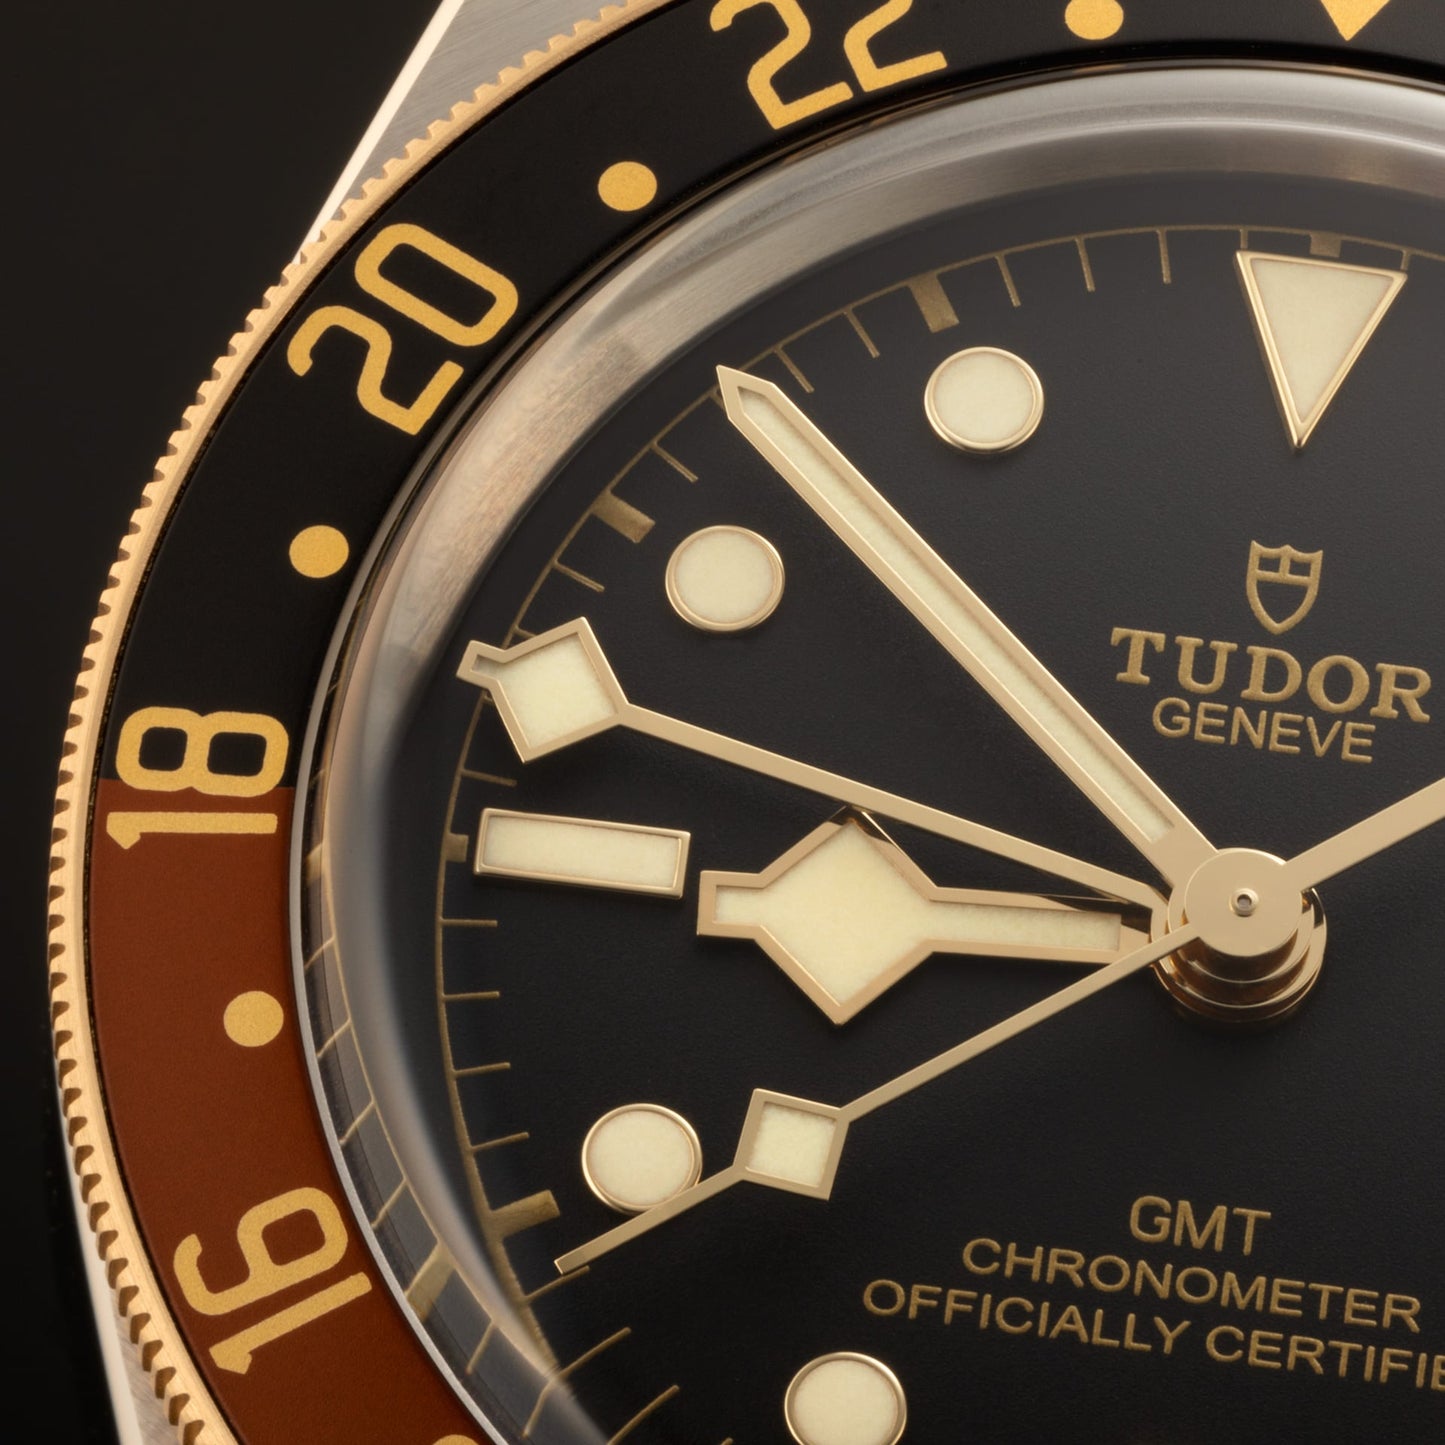 Tudor Black Bay GMT S&G, Stainless Steel and 18k Yellow Gold, 41mm, Ref# M79833MN-0001, Dial